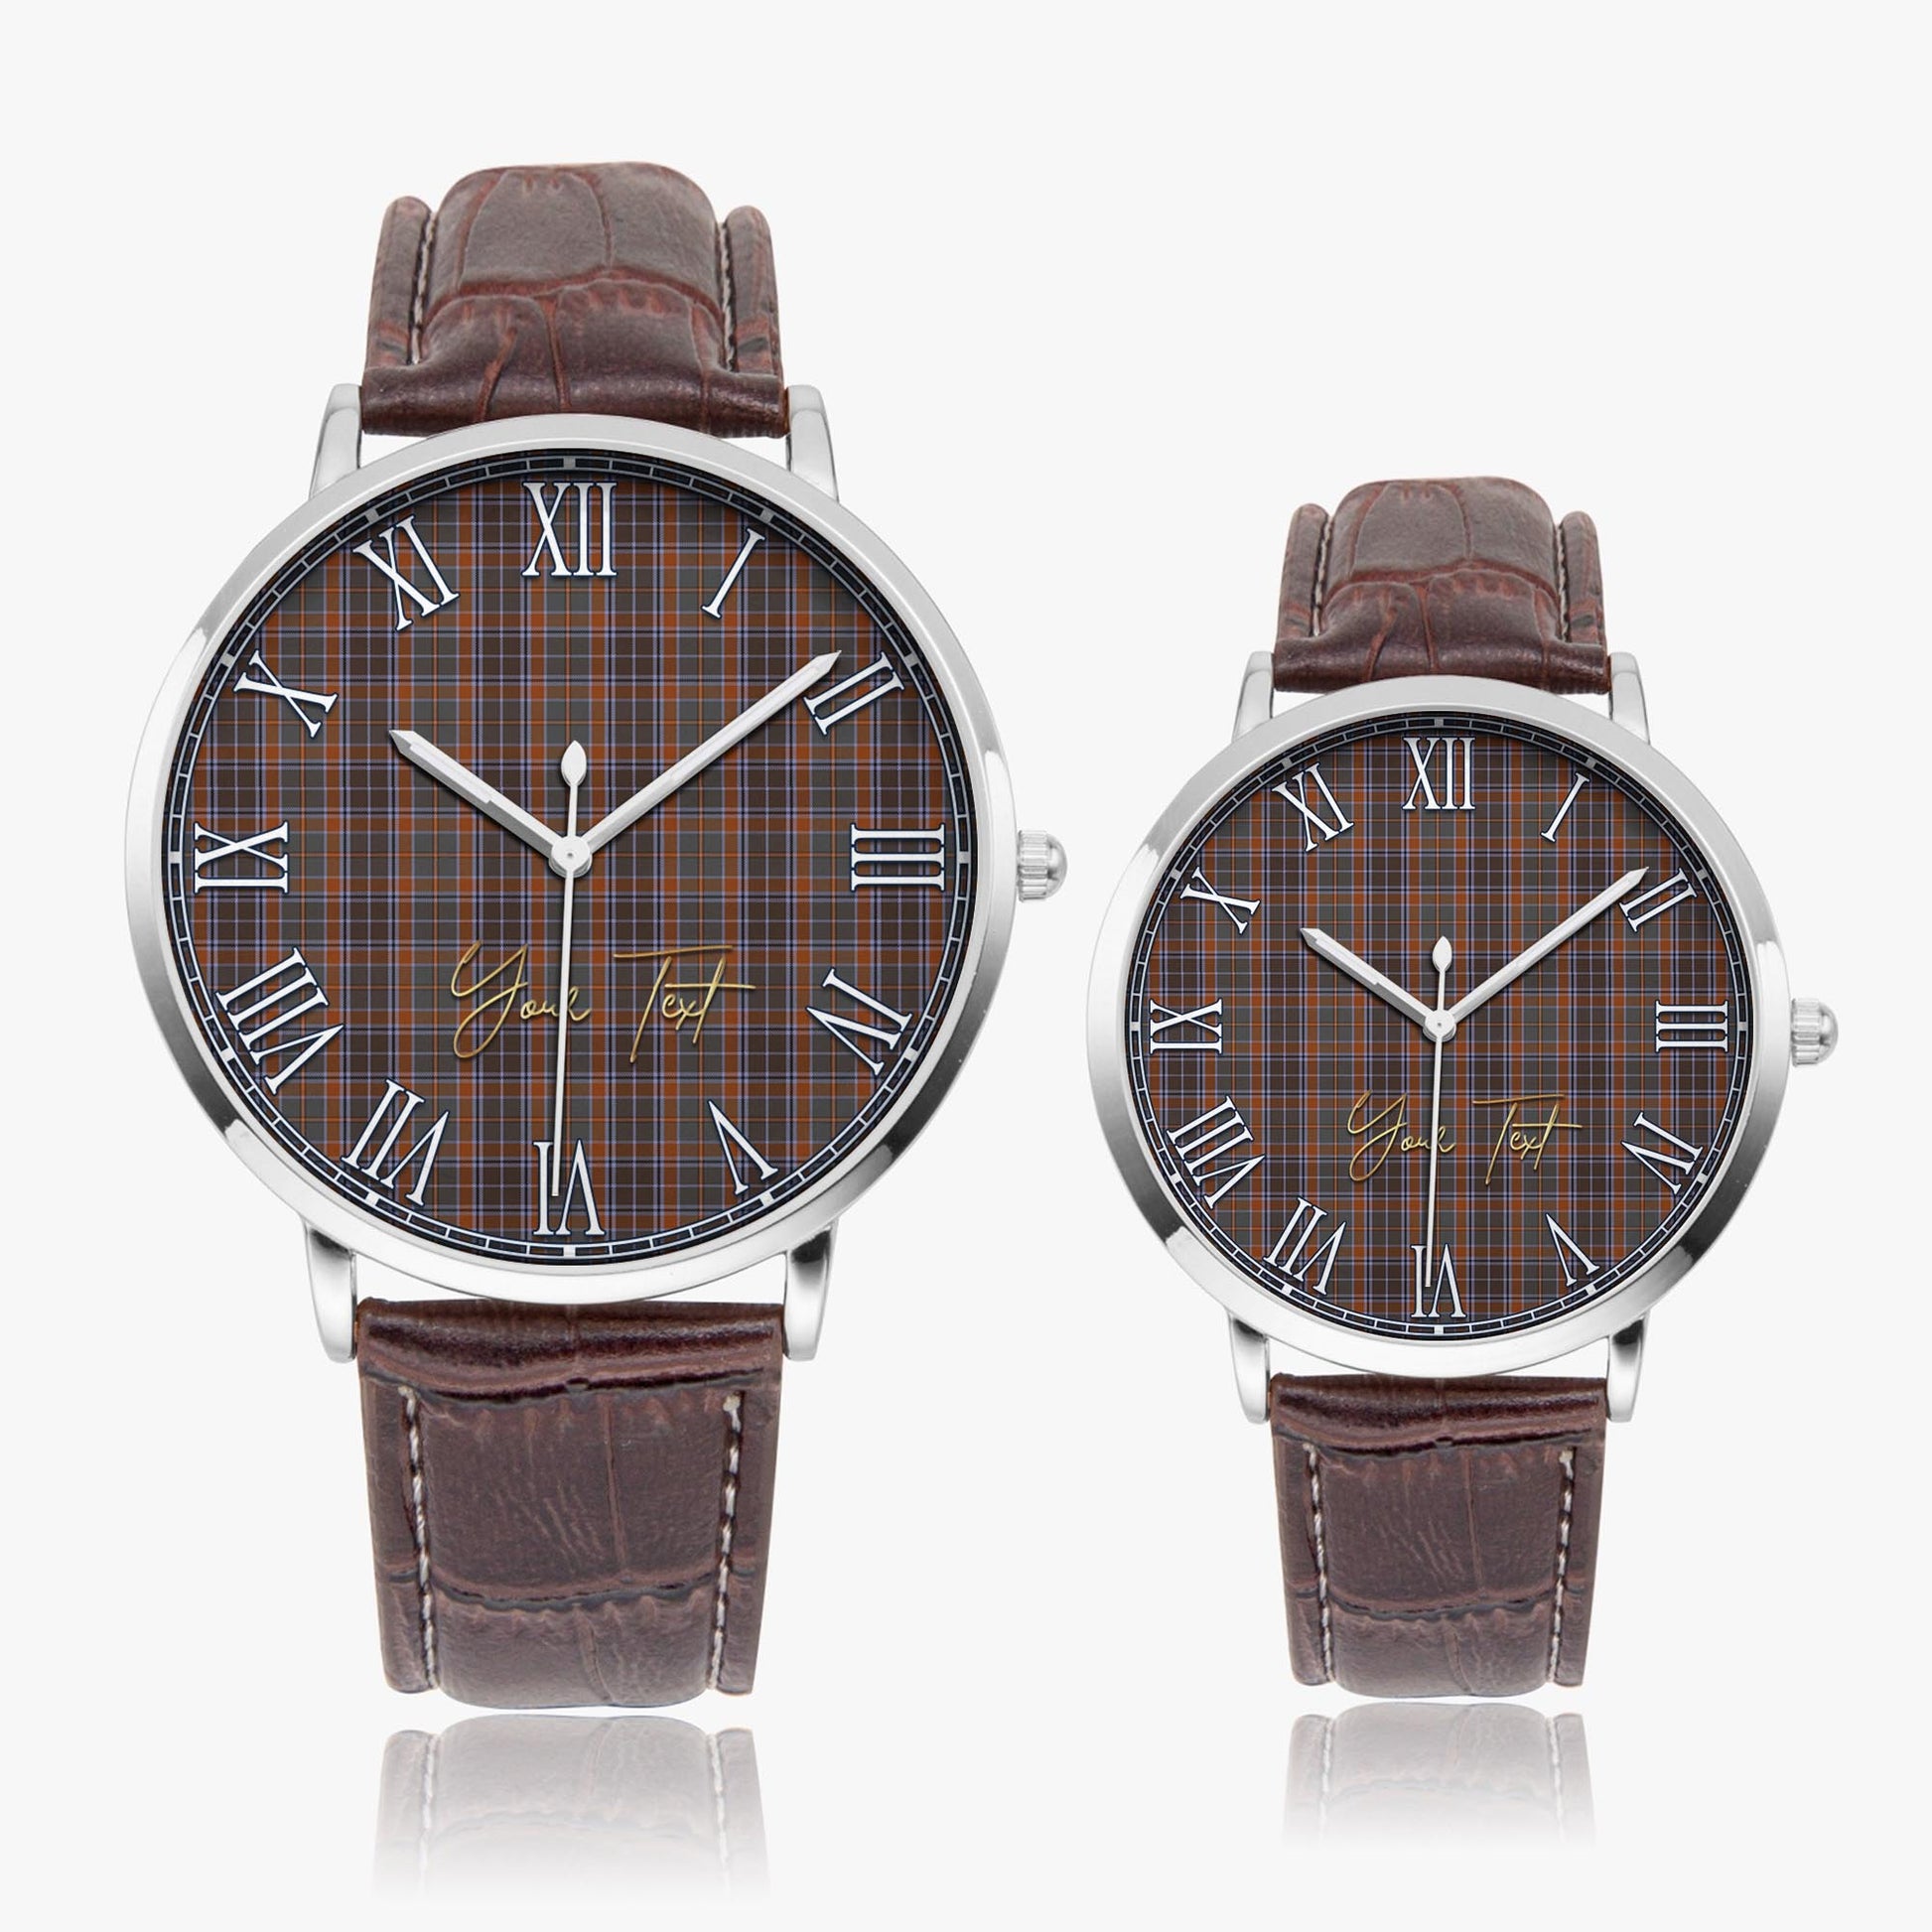 Leitrim County Ireland Tartan Personalized Your Text Leather Trap Quartz Watch Ultra Thin Silver Case With Brown Leather Strap - Tartanvibesclothing